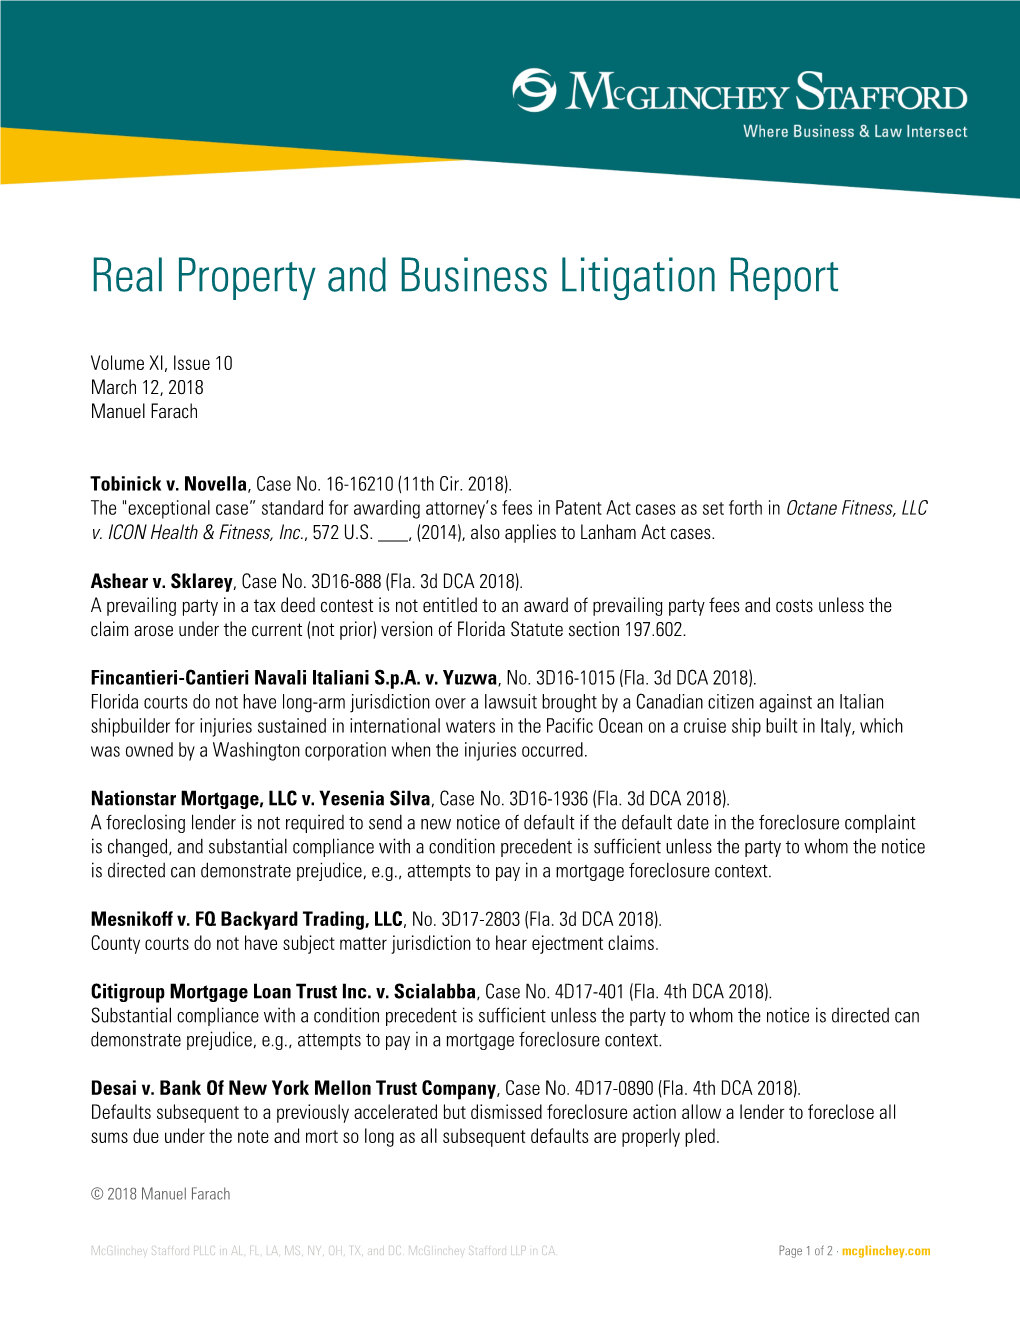 Real Property and Business Litigation Report